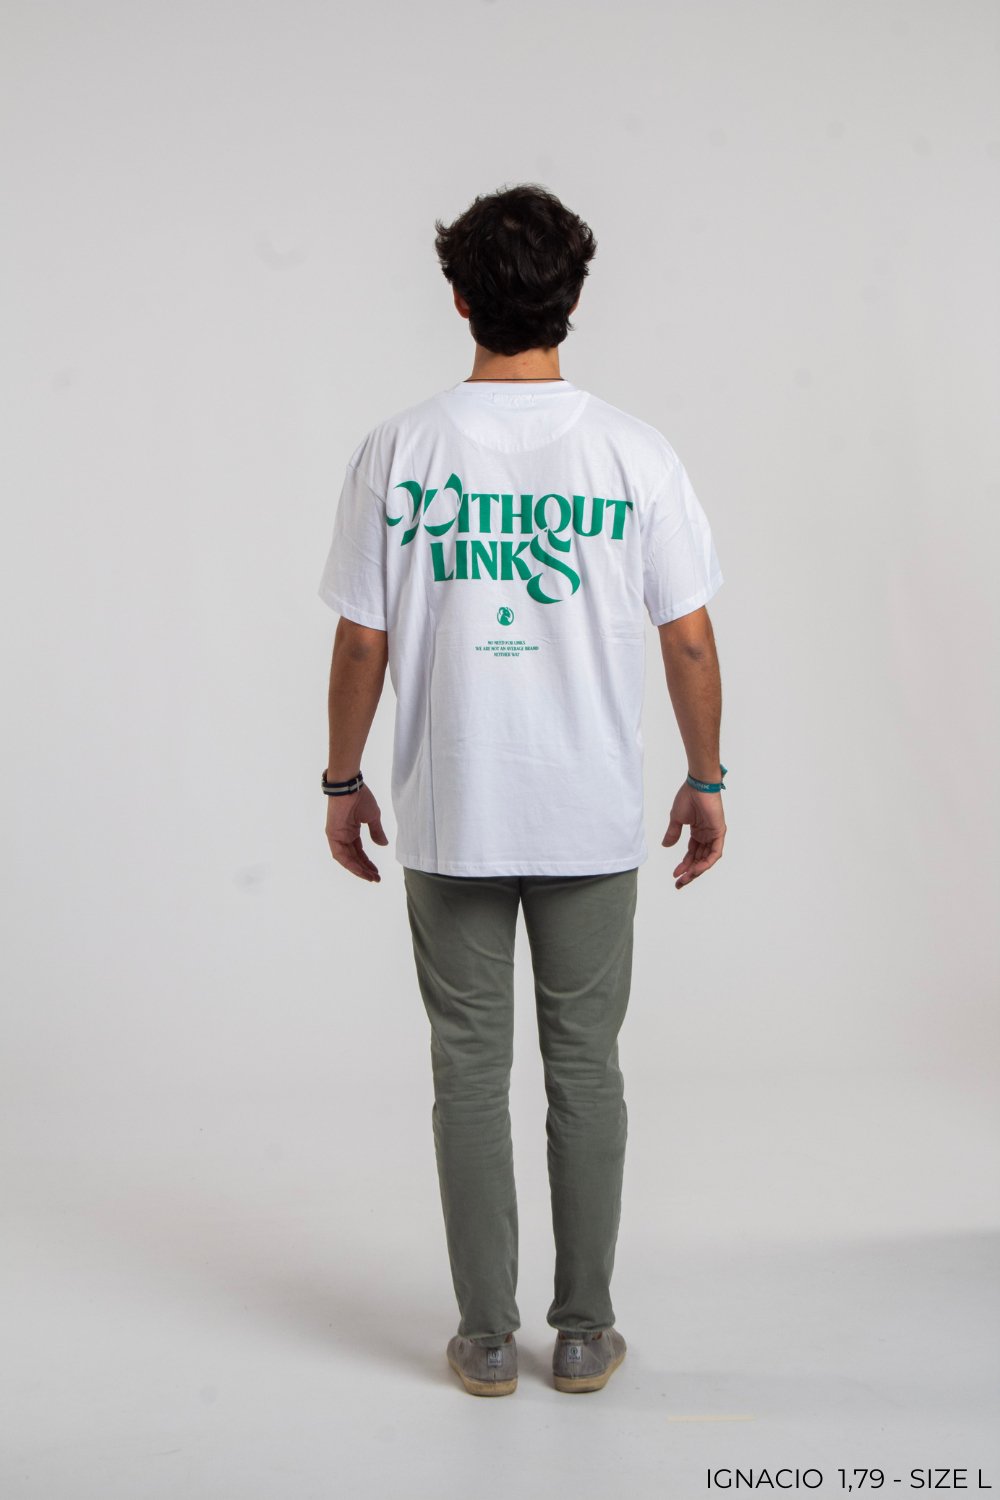 Without Links Tee - White - 1136